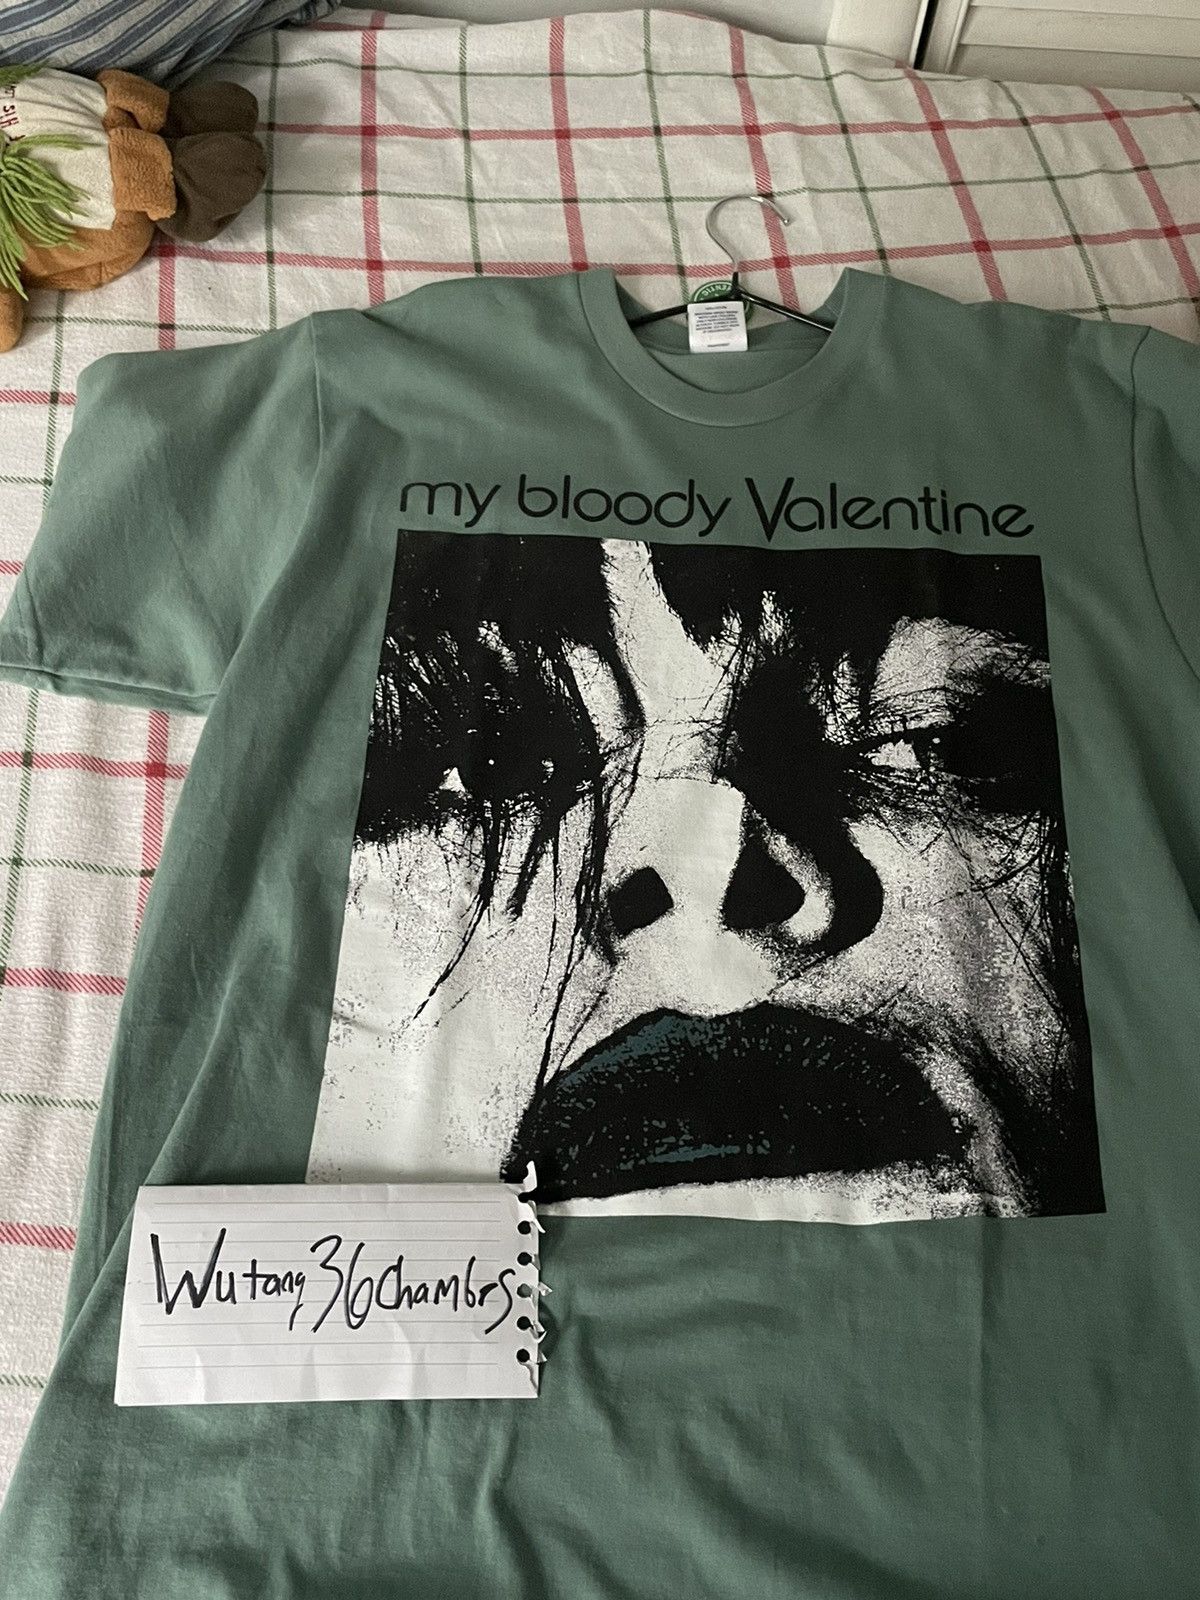 Supreme Supreme/My Bloody Valentine Feed Me With Your Kiss Tee | Grailed